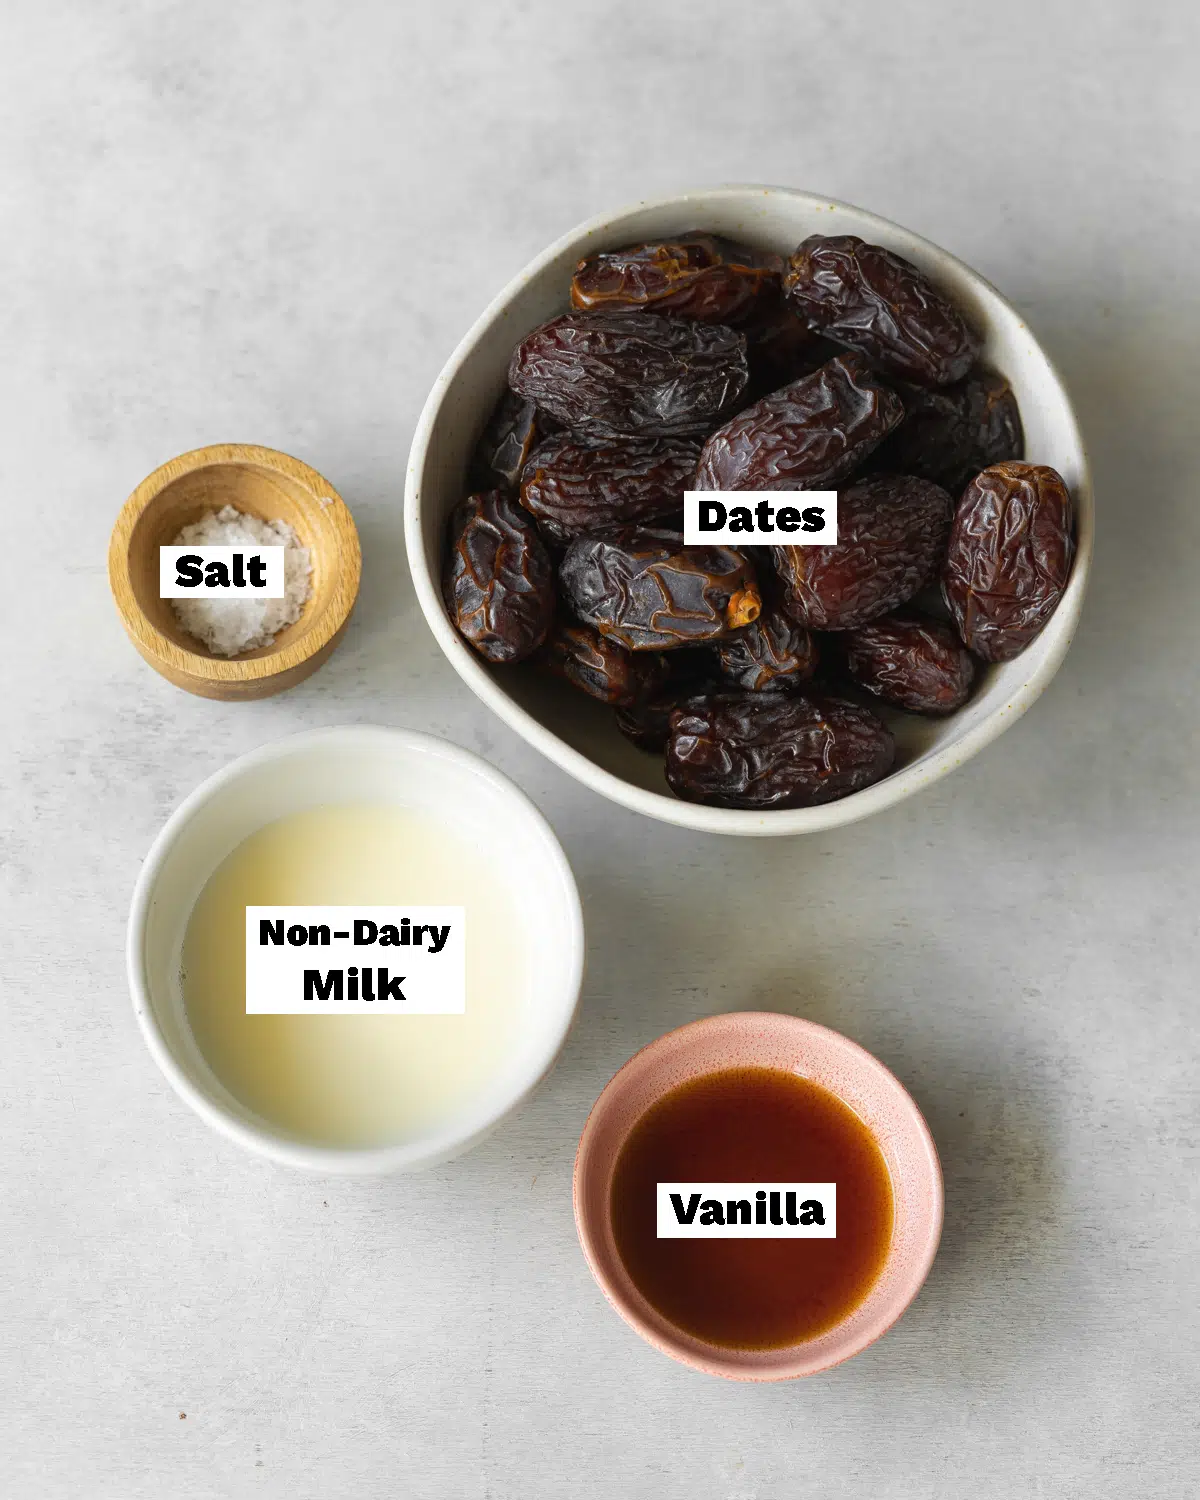 ingredients for making vegan date caramel measured out in bowls on a grey surface.